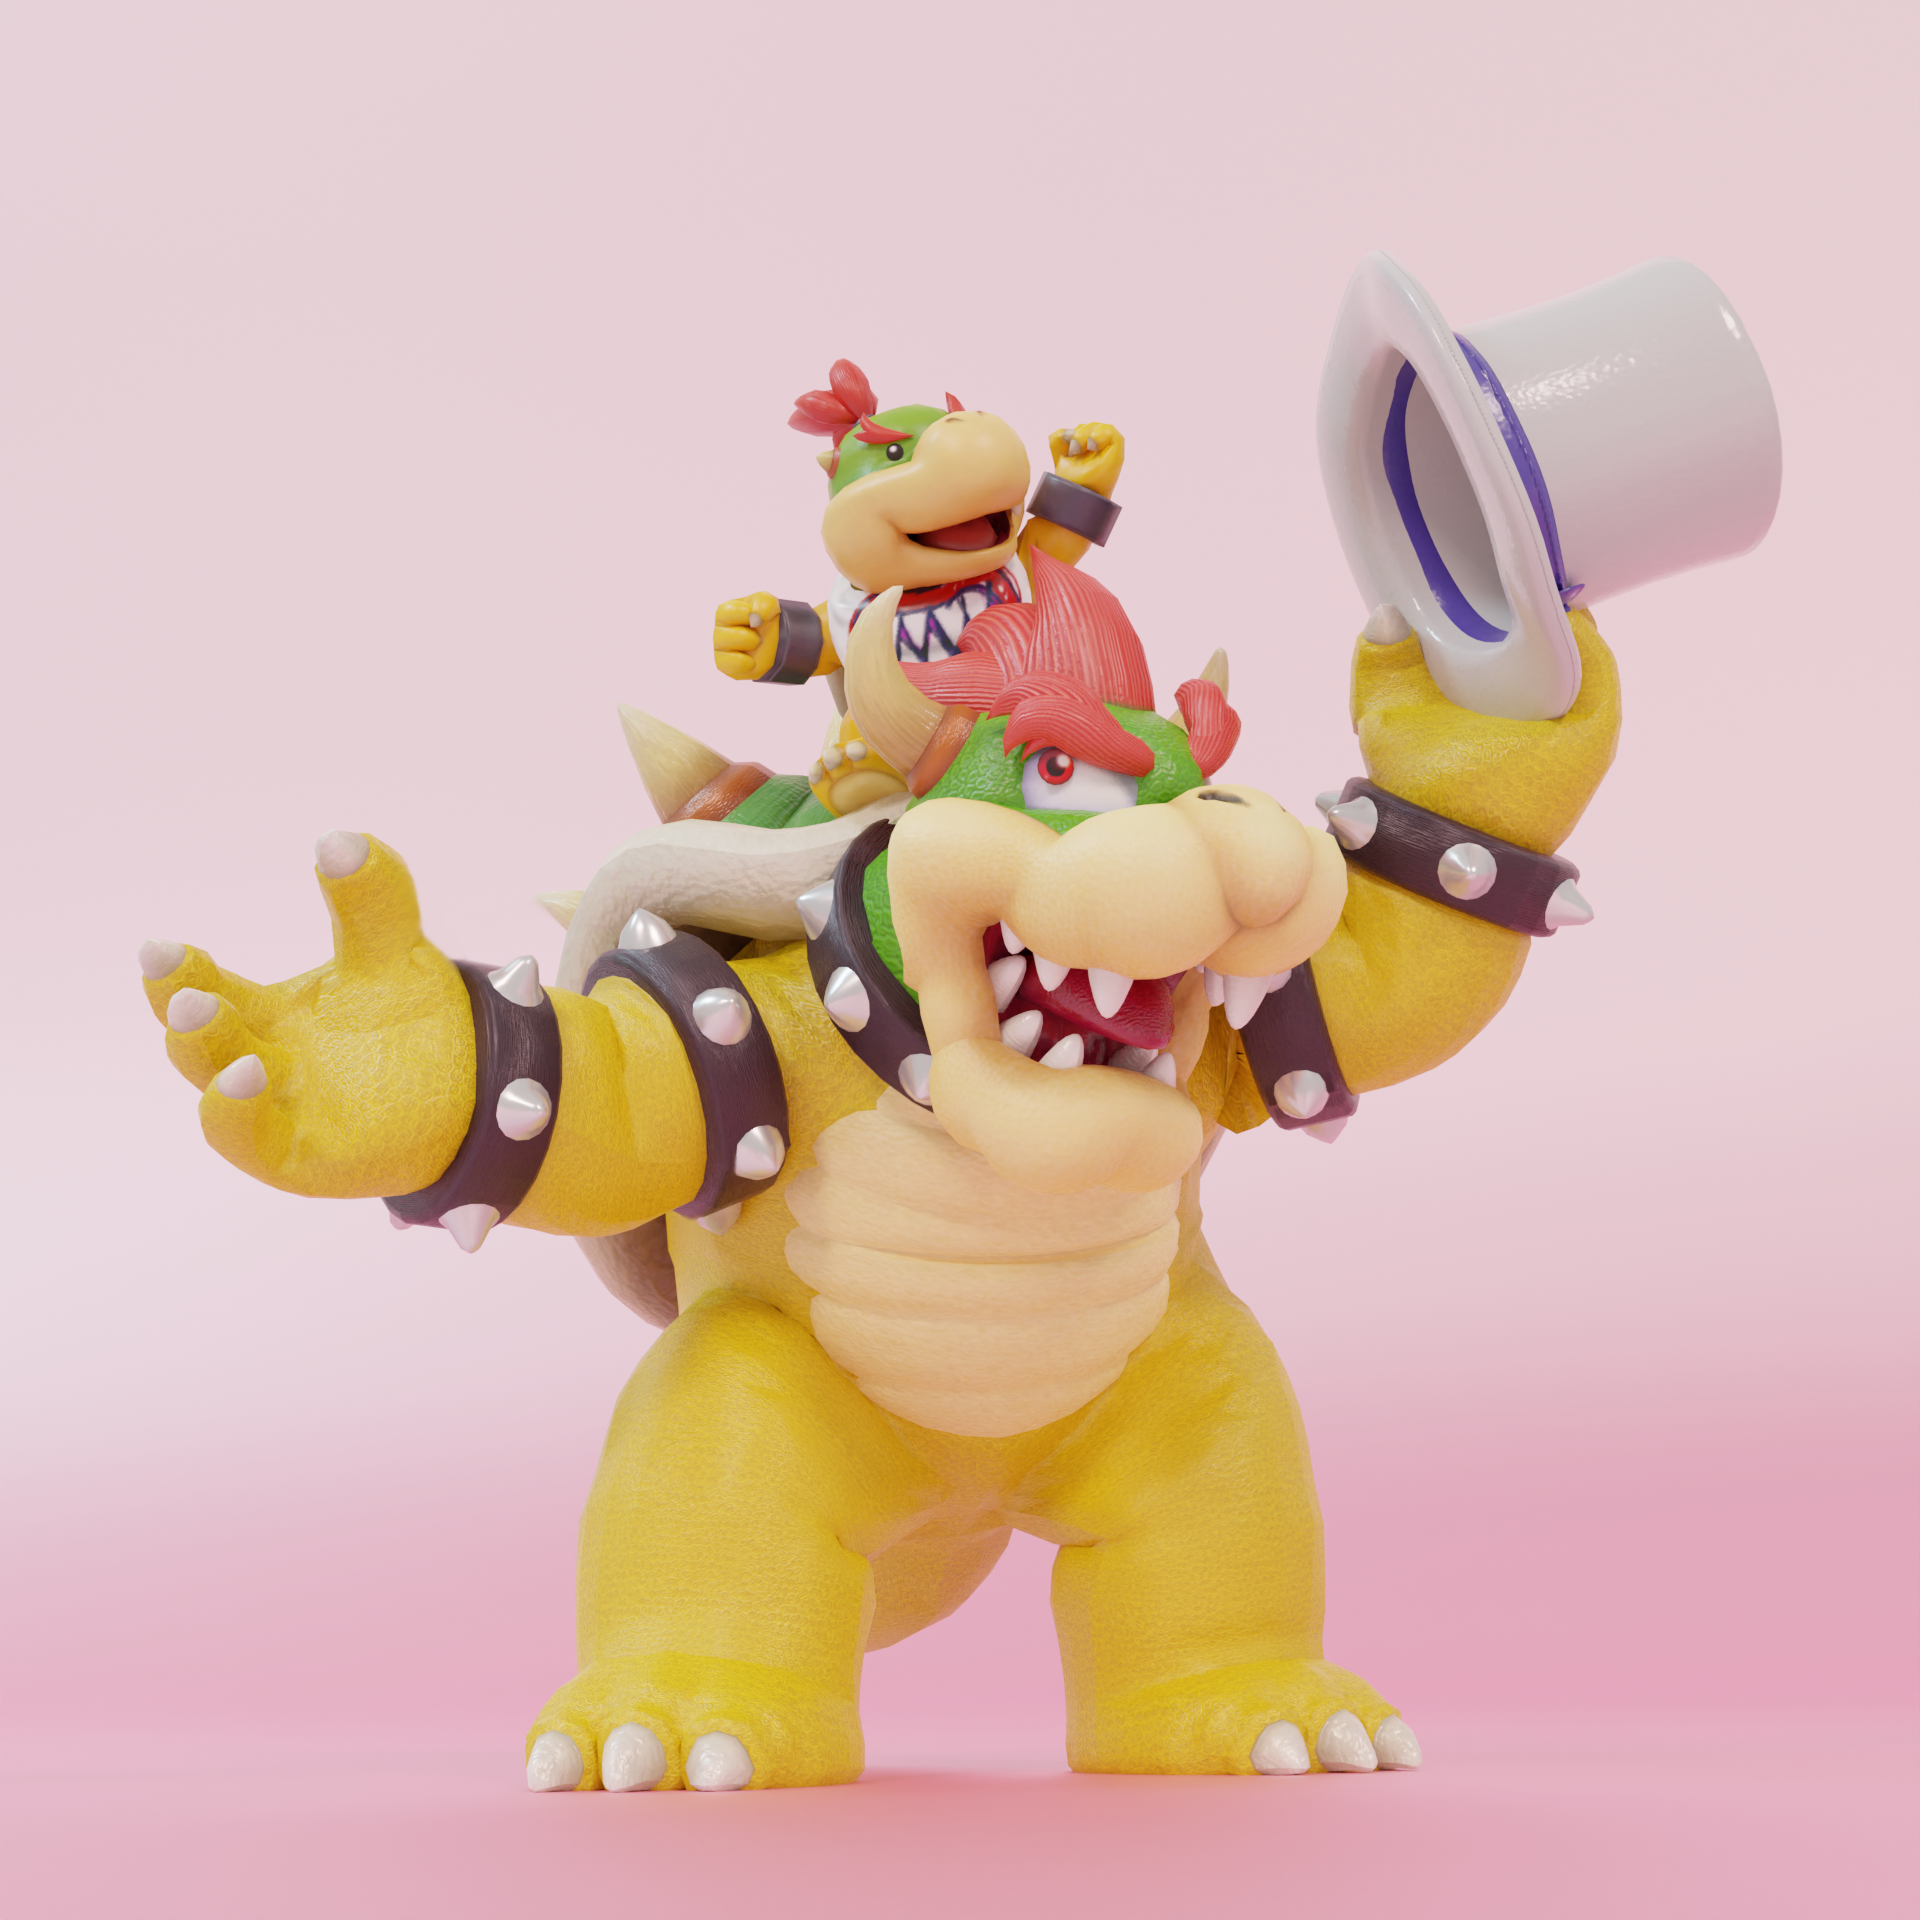 Bowser  Super Mario Bros - Finished Projects - Blender Artists